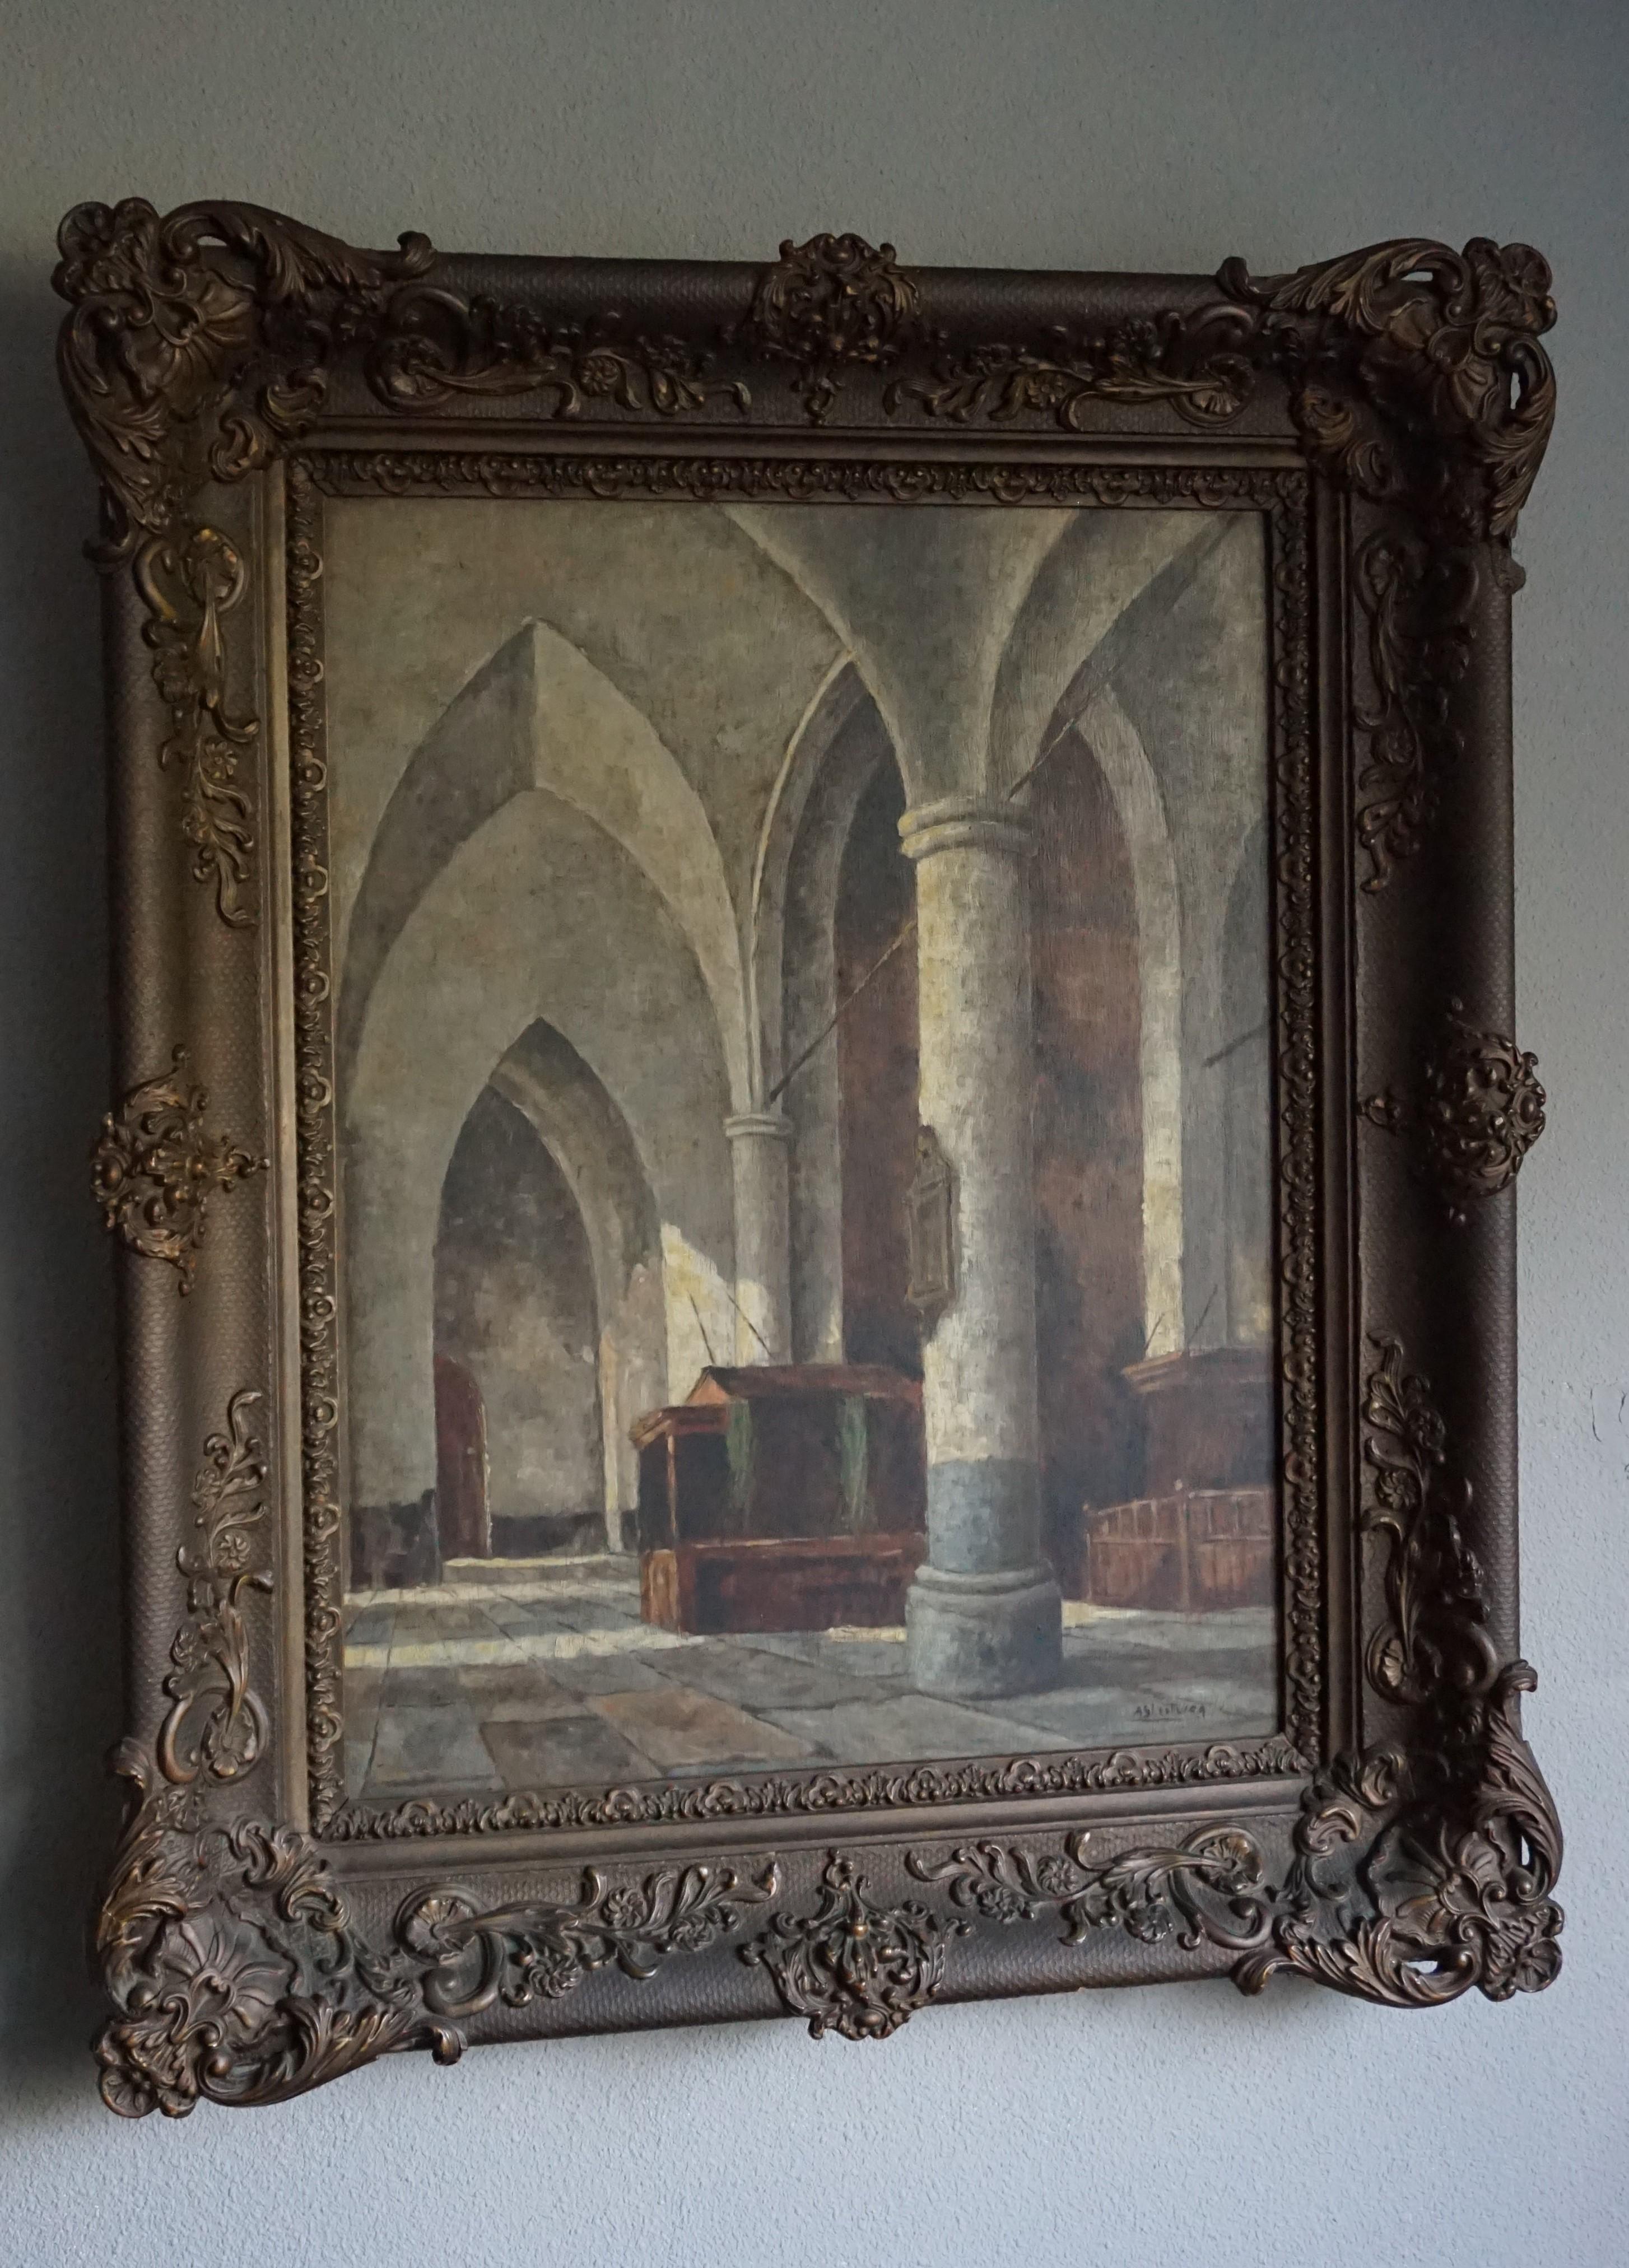 Wood Antique and Unique Gothic Church Interior Painting in a Stunning Mid-1800s Frame